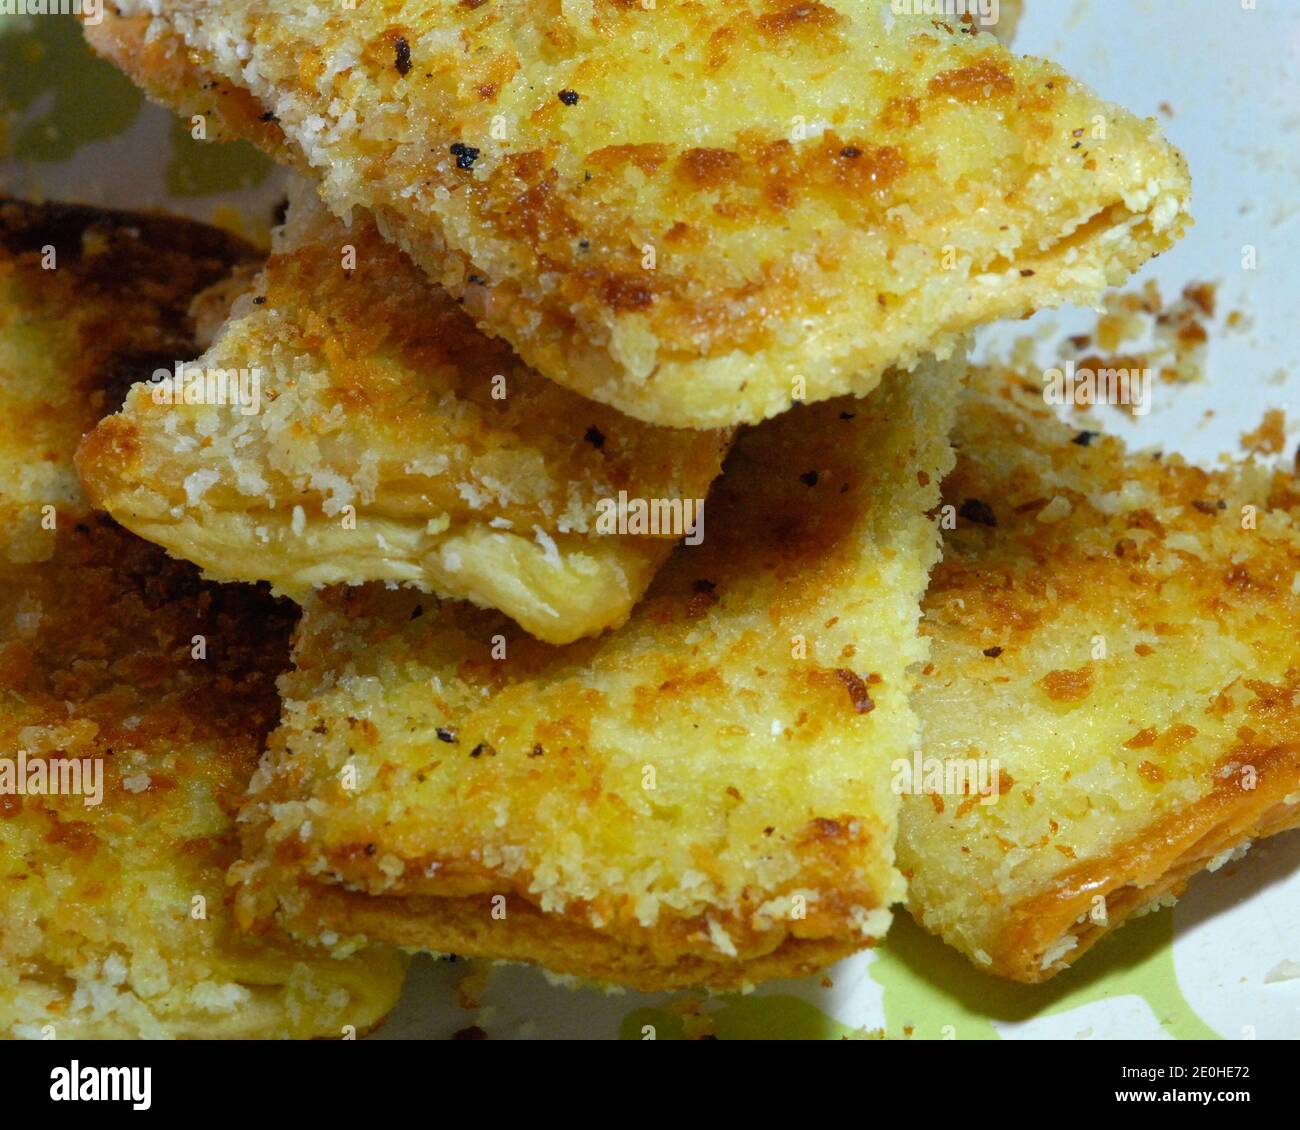 Home made deep fried Tuna Pie with bread crumbs on top in rectangular and square shapes. Stock Photo